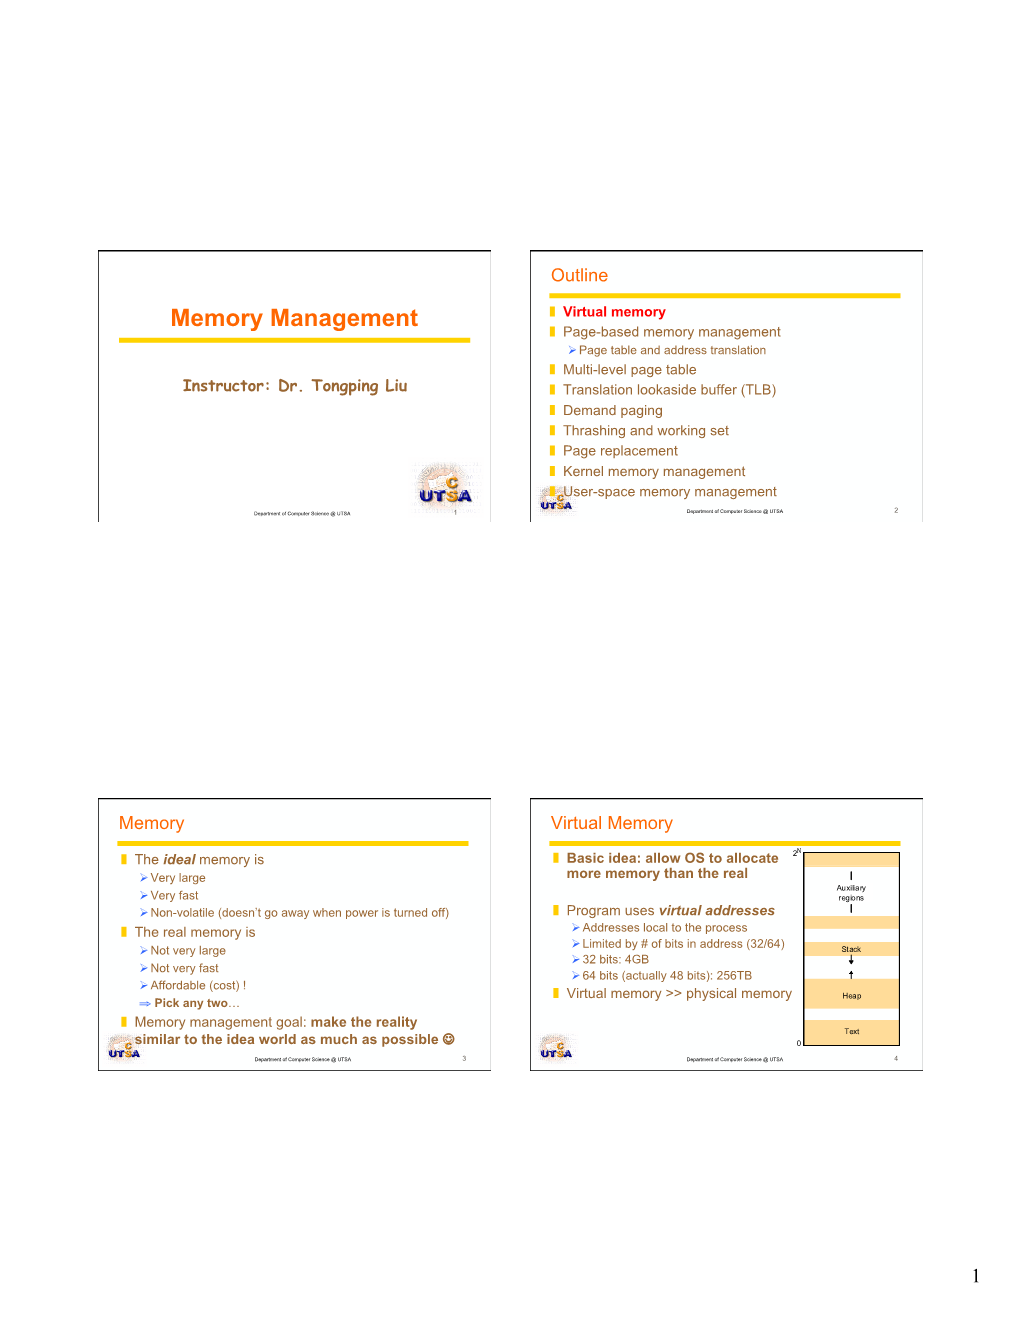 Memory Management ❚ Virtual Memory ❚ Page-Based Memory Management Ø Page Table and Address Translation ❚ Multi-Level Page Table Instructor: Dr